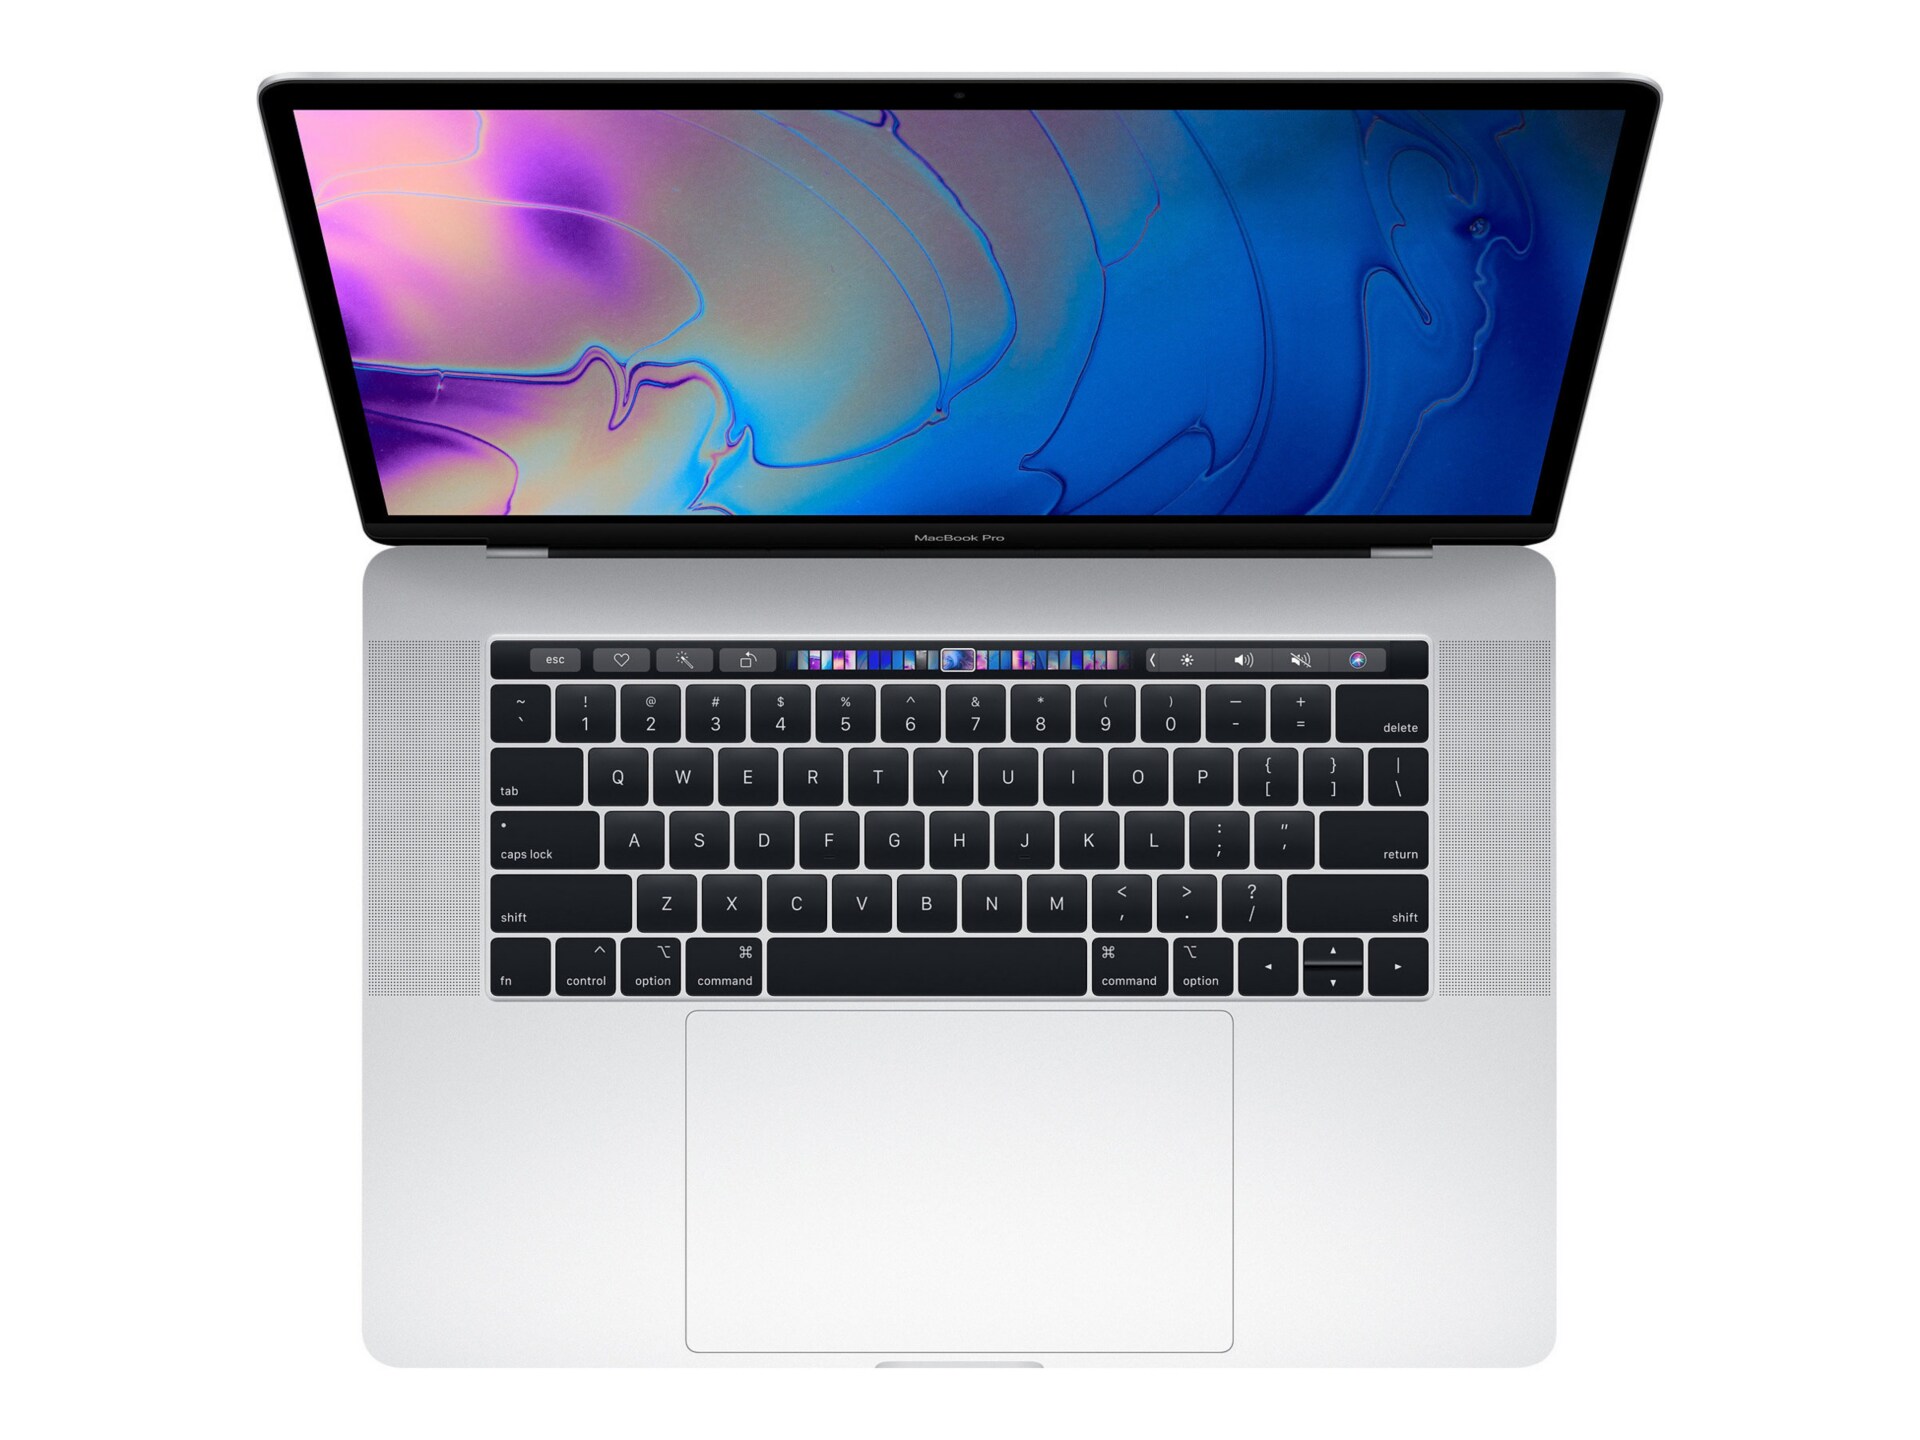 Apple MacBook Pro with Touch Bar - 15.4" - Core i7 - 16 GB RAM - 512 GB SSD - QWERTY US